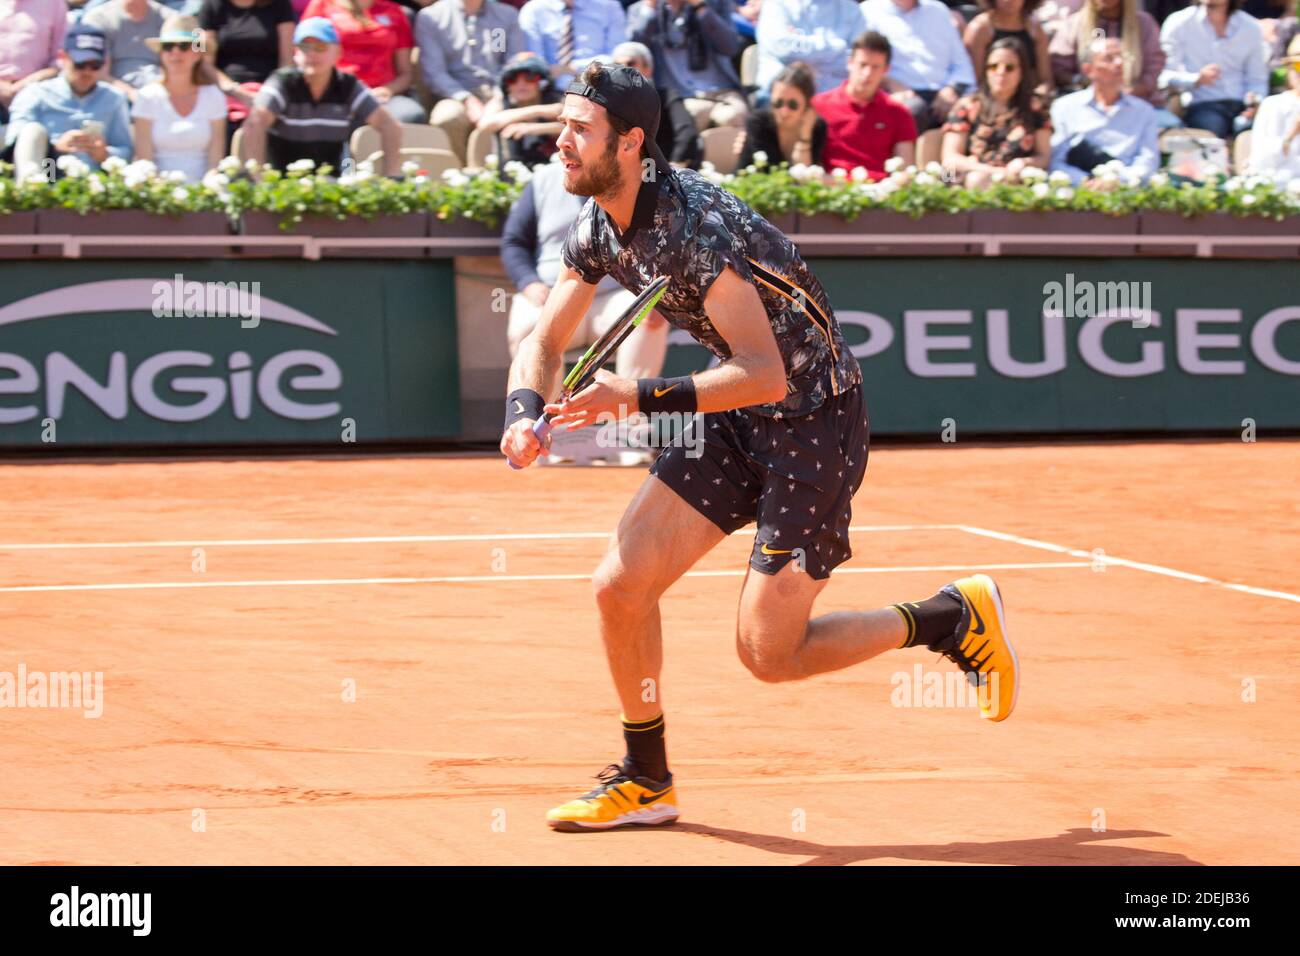 Karen Khachanov in action during French Tennis Open at Roland-Garros arena  on June 06, 2019 in Paris, France. Photo by Nasser Berzane/ABACAPRESS.COM  Stock Photo - Alamy